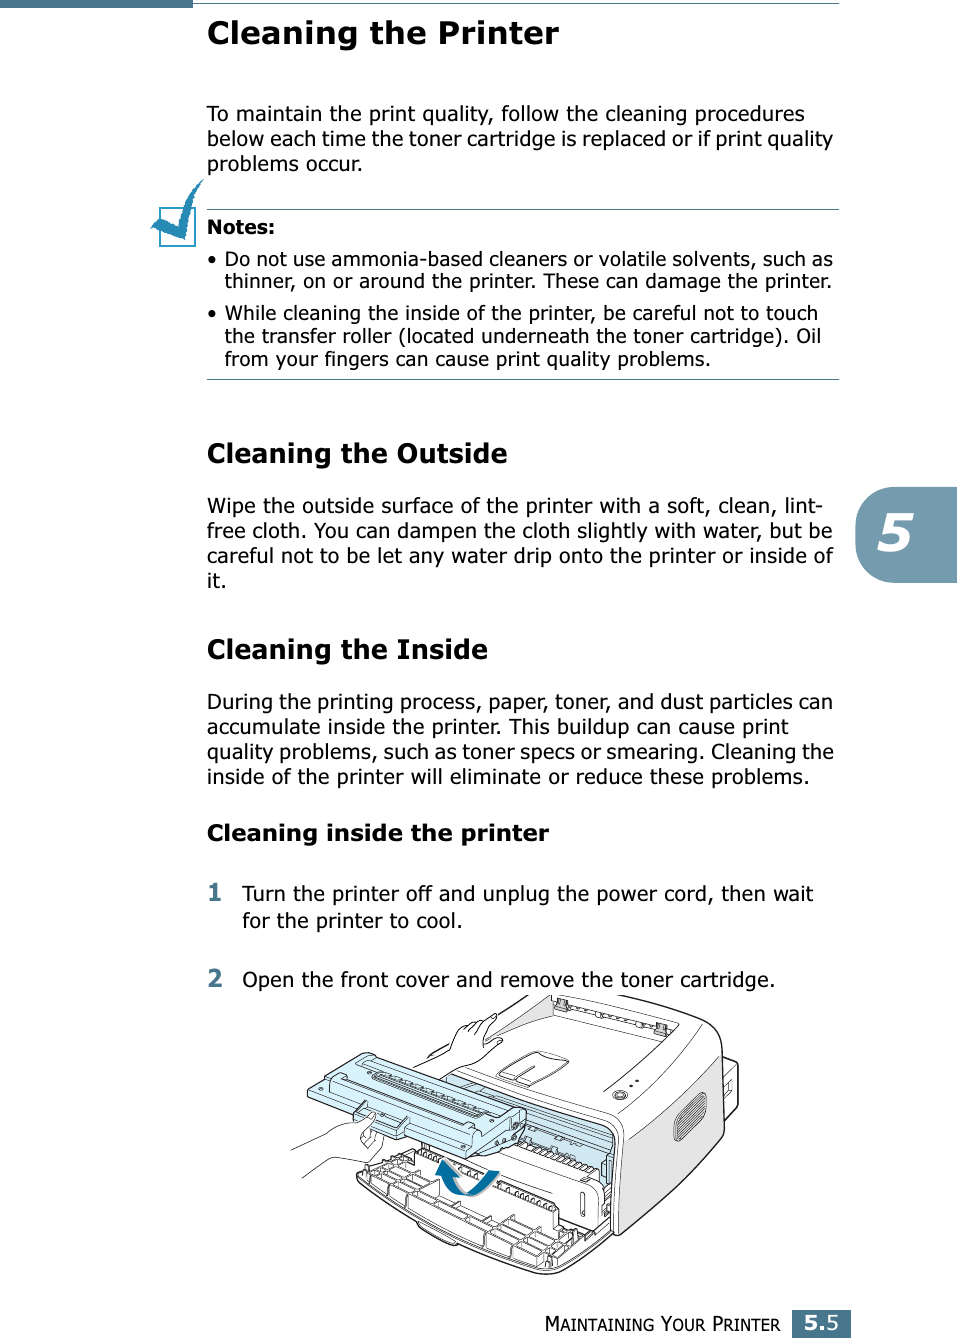 MAINTAINING YOUR PRINTER5.55Cleaning the PrinterTo maintain the print quality, follow the cleaning procedures below each time the toner cartridge is replaced or if print quality problems occur.Notes: • Do not use ammonia-based cleaners or volatile solvents, such as thinner, on or around the printer. These can damage the printer.• While cleaning the inside of the printer, be careful not to touch the transfer roller (located underneath the toner cartridge). Oil from your fingers can cause print quality problems.Cleaning the OutsideWipe the outside surface of the printer with a soft, clean, lint-free cloth. You can dampen the cloth slightly with water, but be careful not to be let any water drip onto the printer or inside of it.Cleaning the InsideDuring the printing process, paper, toner, and dust particles can accumulate inside the printer. This buildup can cause print quality problems, such as toner specs or smearing. Cleaning the inside of the printer will eliminate or reduce these problems.Cleaning inside the printer1Turn the printer off and unplug the power cord, then wait for the printer to cool.2Open the front cover and remove the toner cartridge.